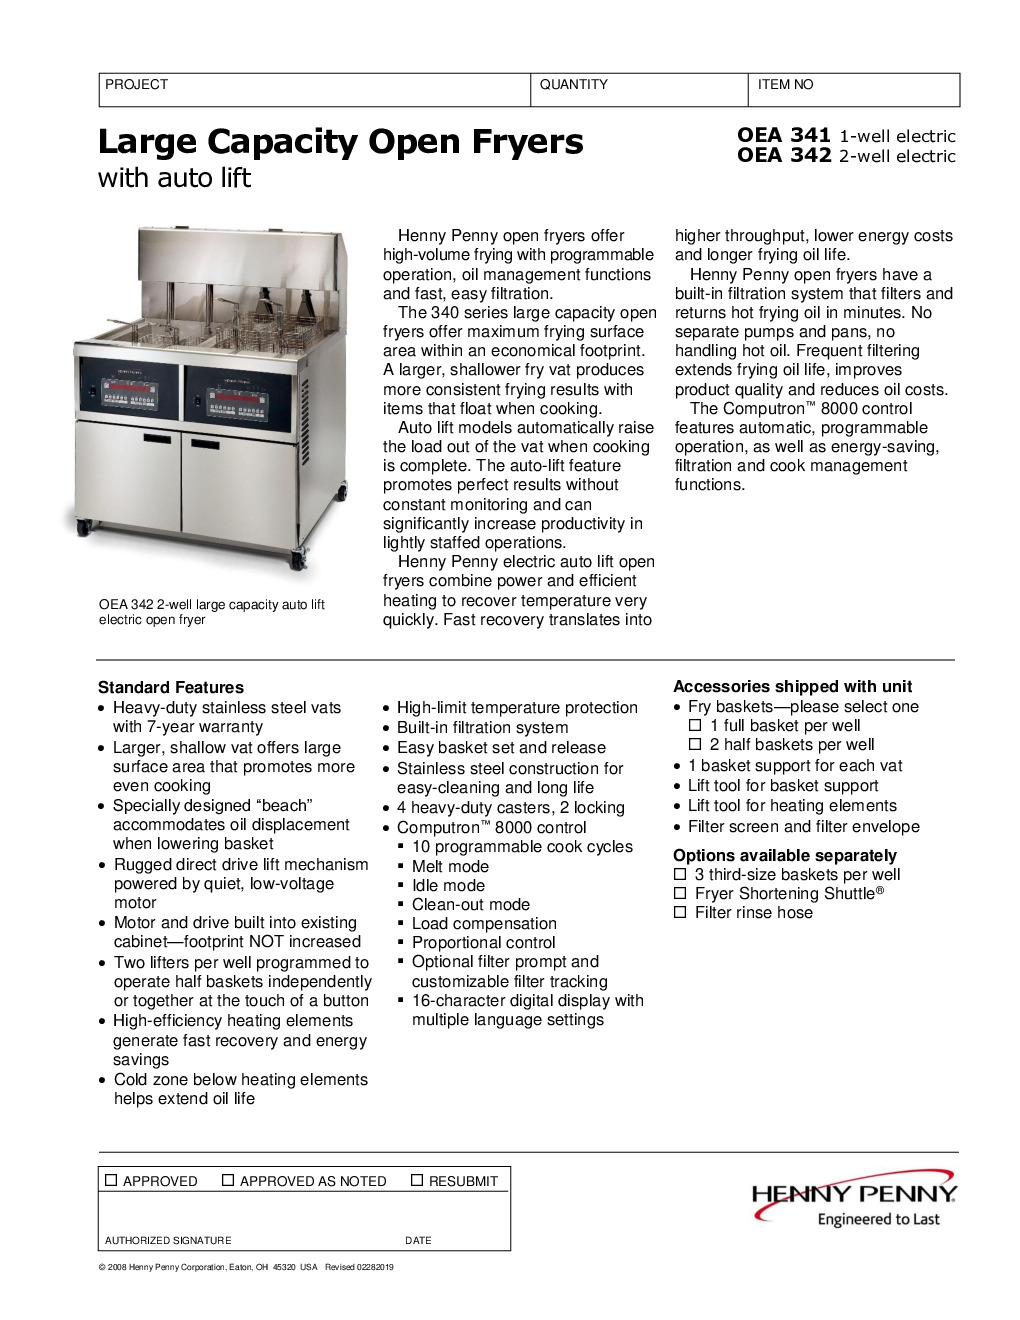 Henny Penny OEA341.01 Multiple Battery Electric Fryer w/ 1 Well, 80-lb Capacity, Built-In Filter